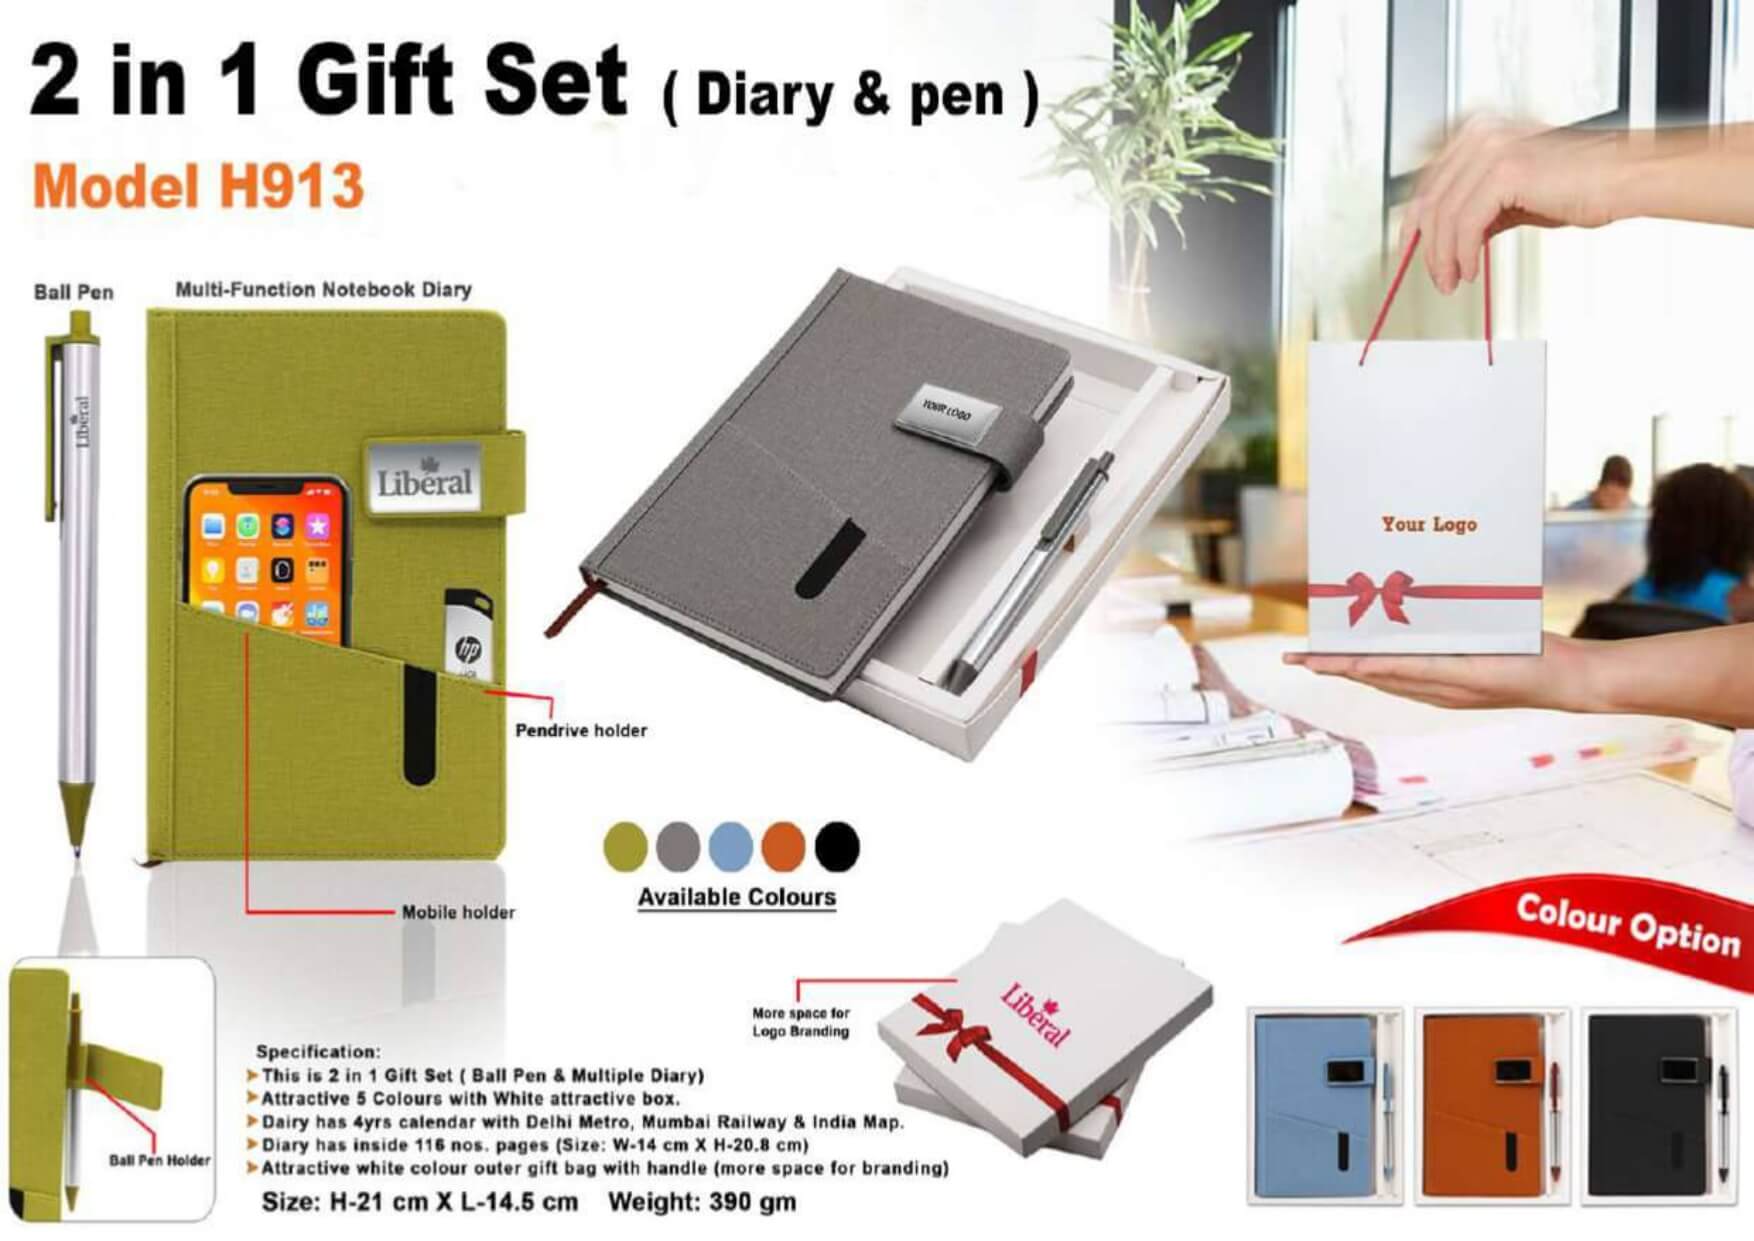 2 in 1 Gift Set Diary and Pen 913